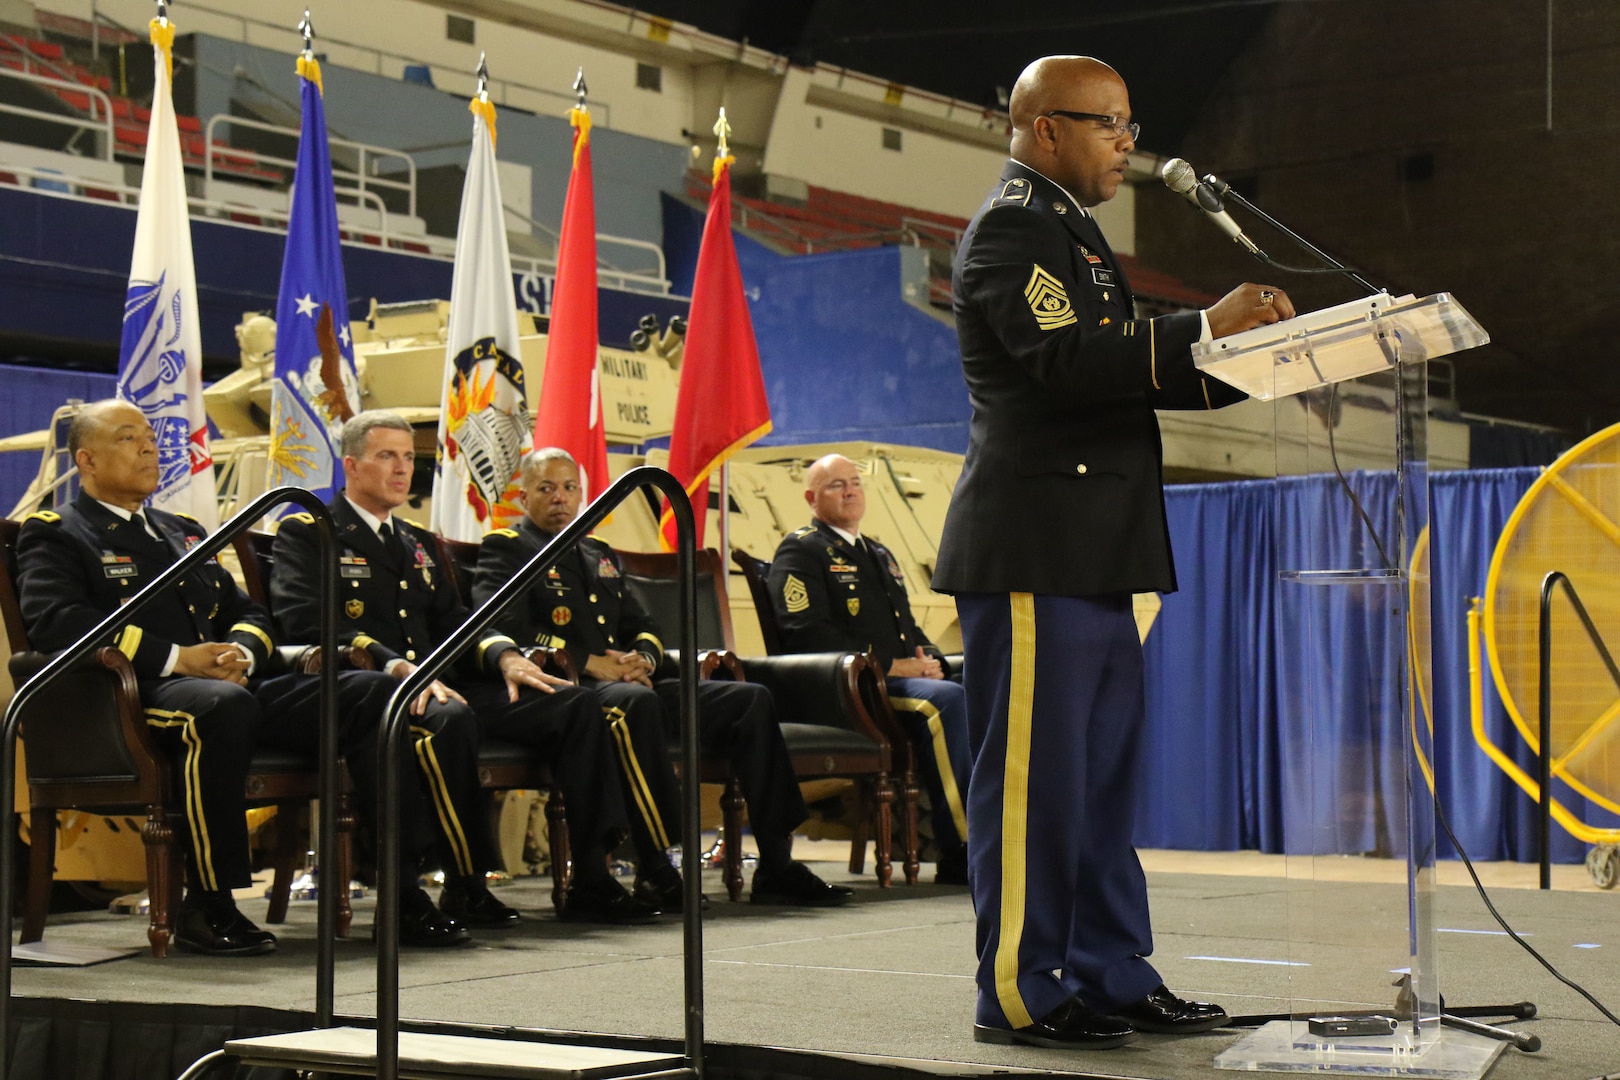 WASHINGTON- Command Sgt. Maj. Terrance A. Smith addresses Soldiers during the Land Component Command (LCC) change of responsibility ceremony, June 10, 2018 at the District of Columbia Armory. Smith will serve as an enlisted adviser to Brig. Gen. Robert K. Ryan, Commander, LCC, D.C. National Guard. (U.S. Army National Guard photo by Sgt. Adrian Shelton/Released)